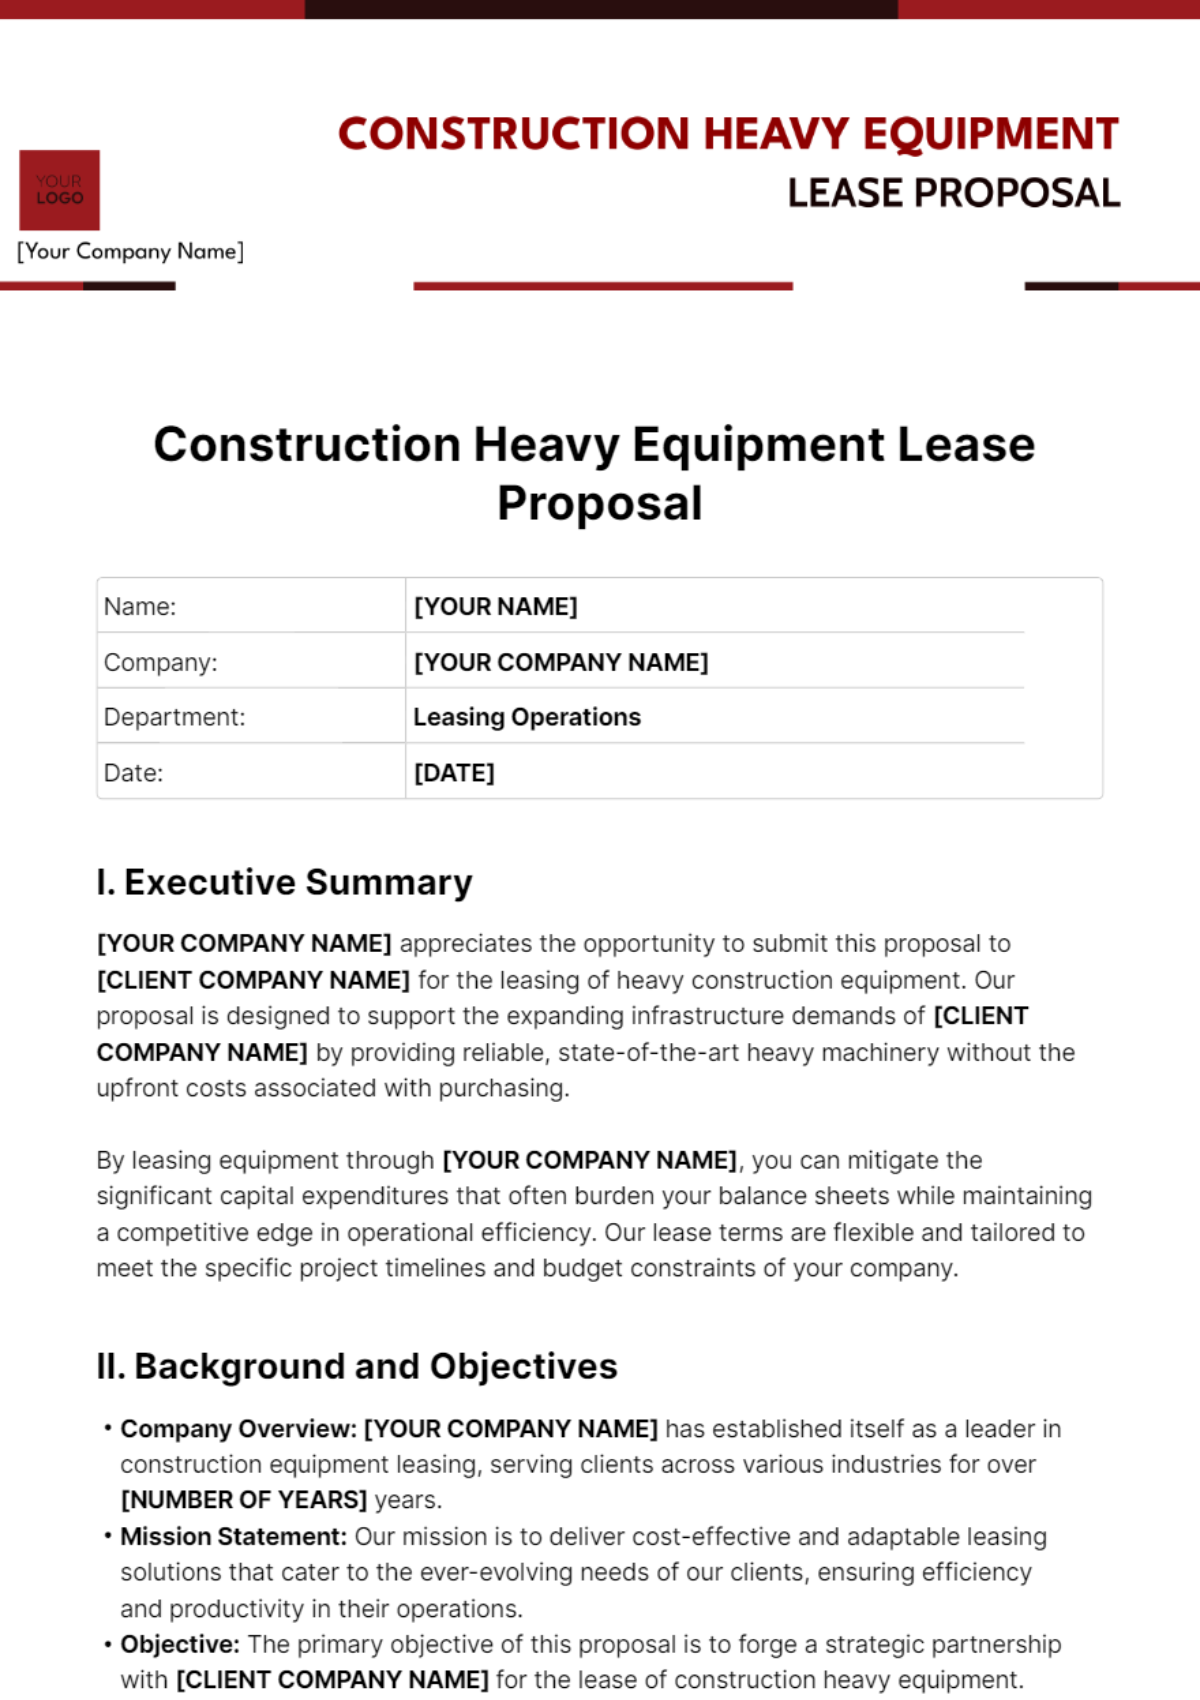 Free Construction Heavy Equipment Lease Proposal Template